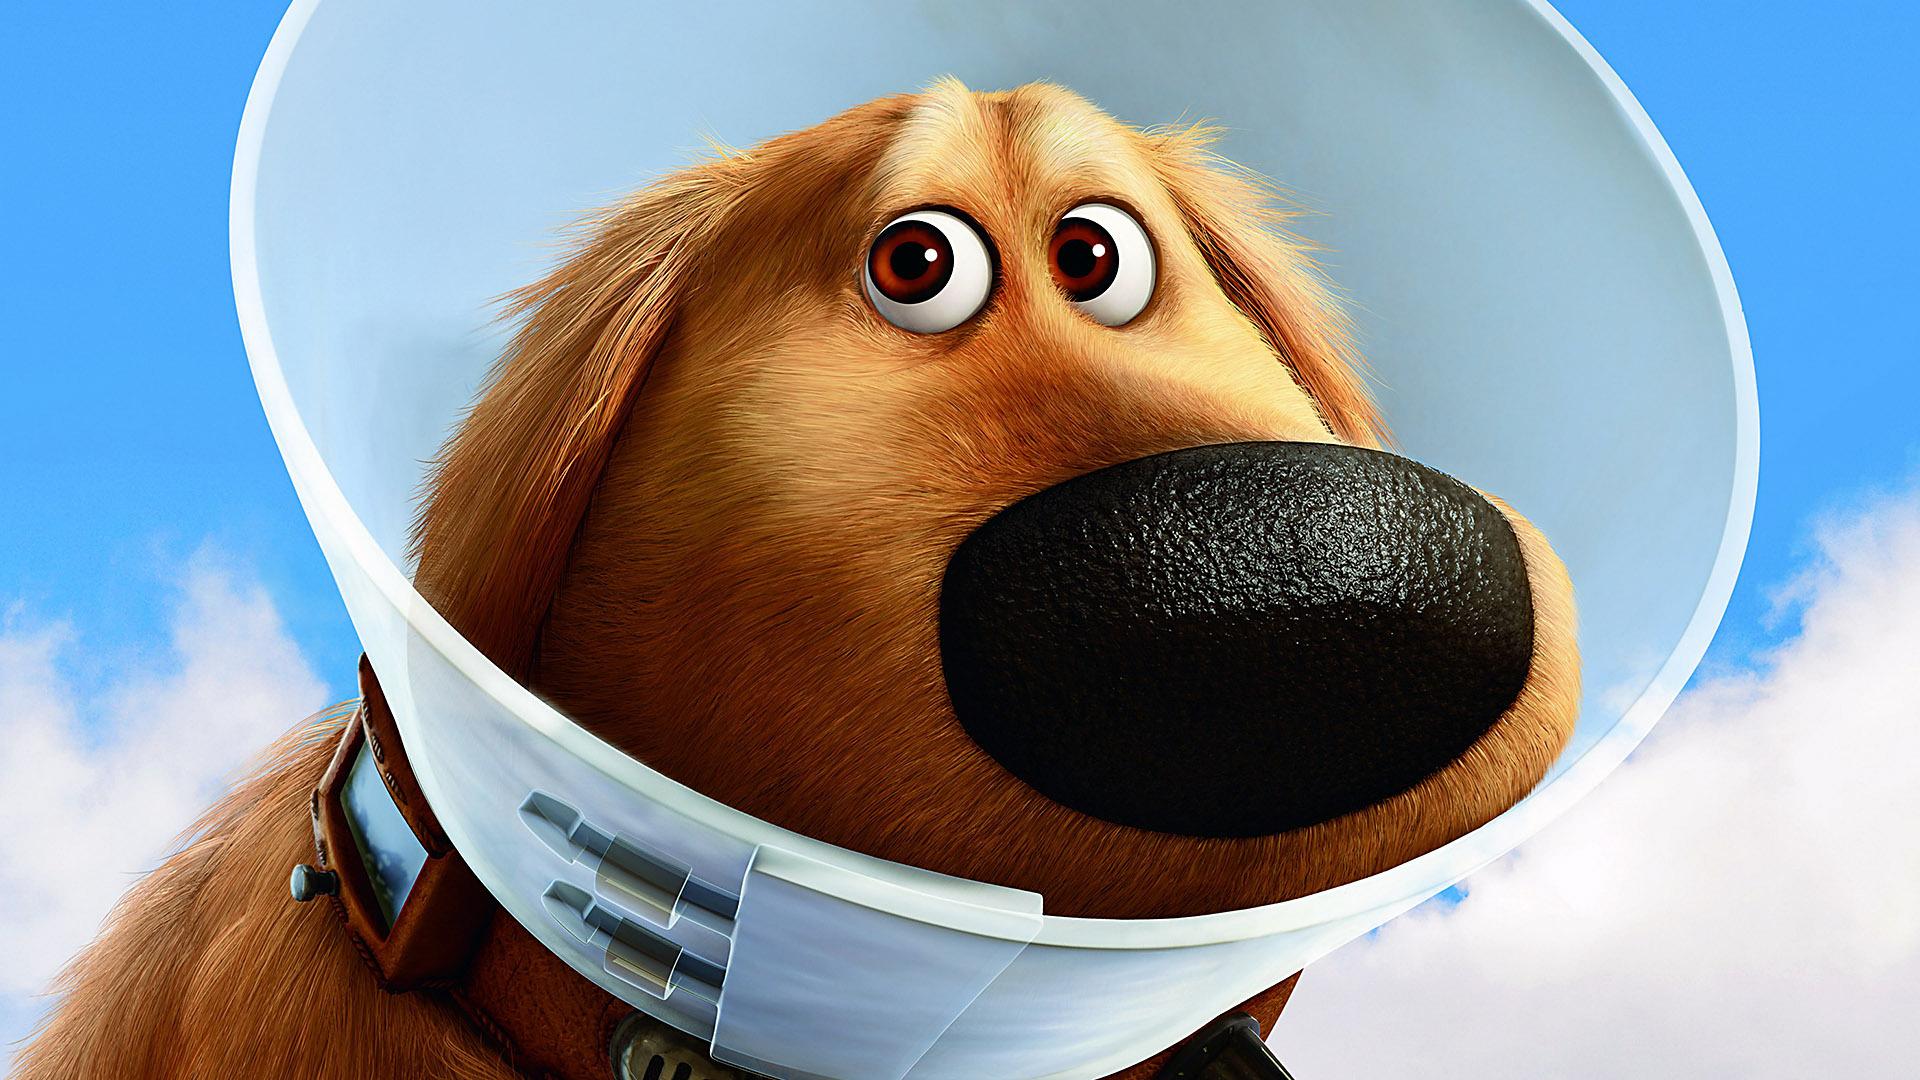 Dog And Up Image - Movie Dog Cartoon Characters - 1920x1080 Wallpaper -  